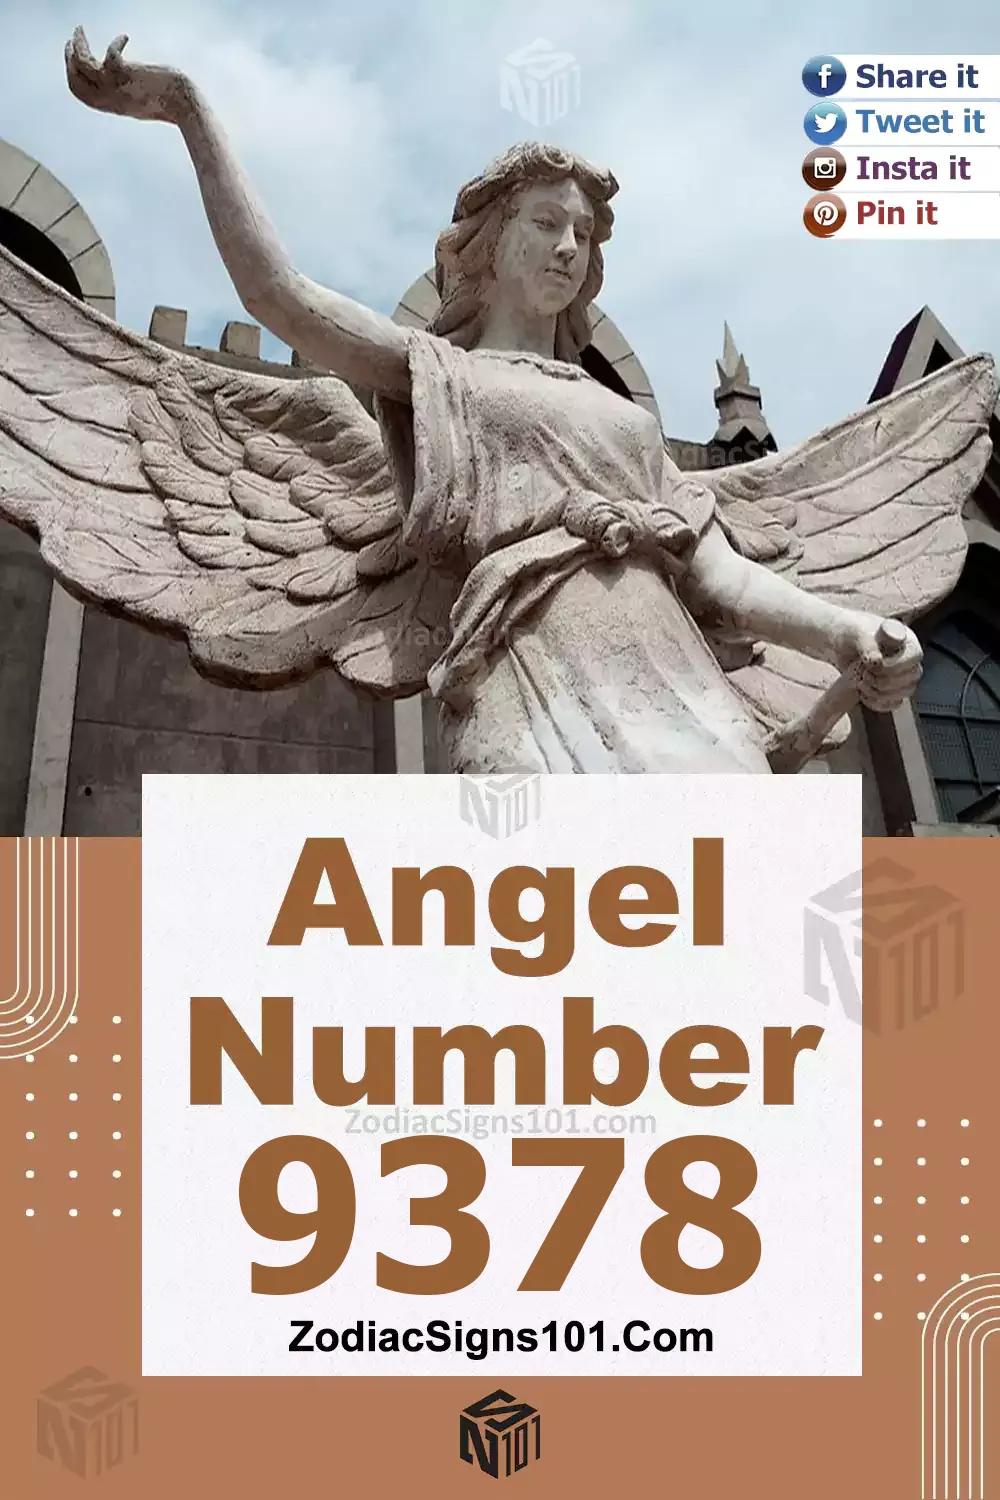 9378 Angel Number Meaning